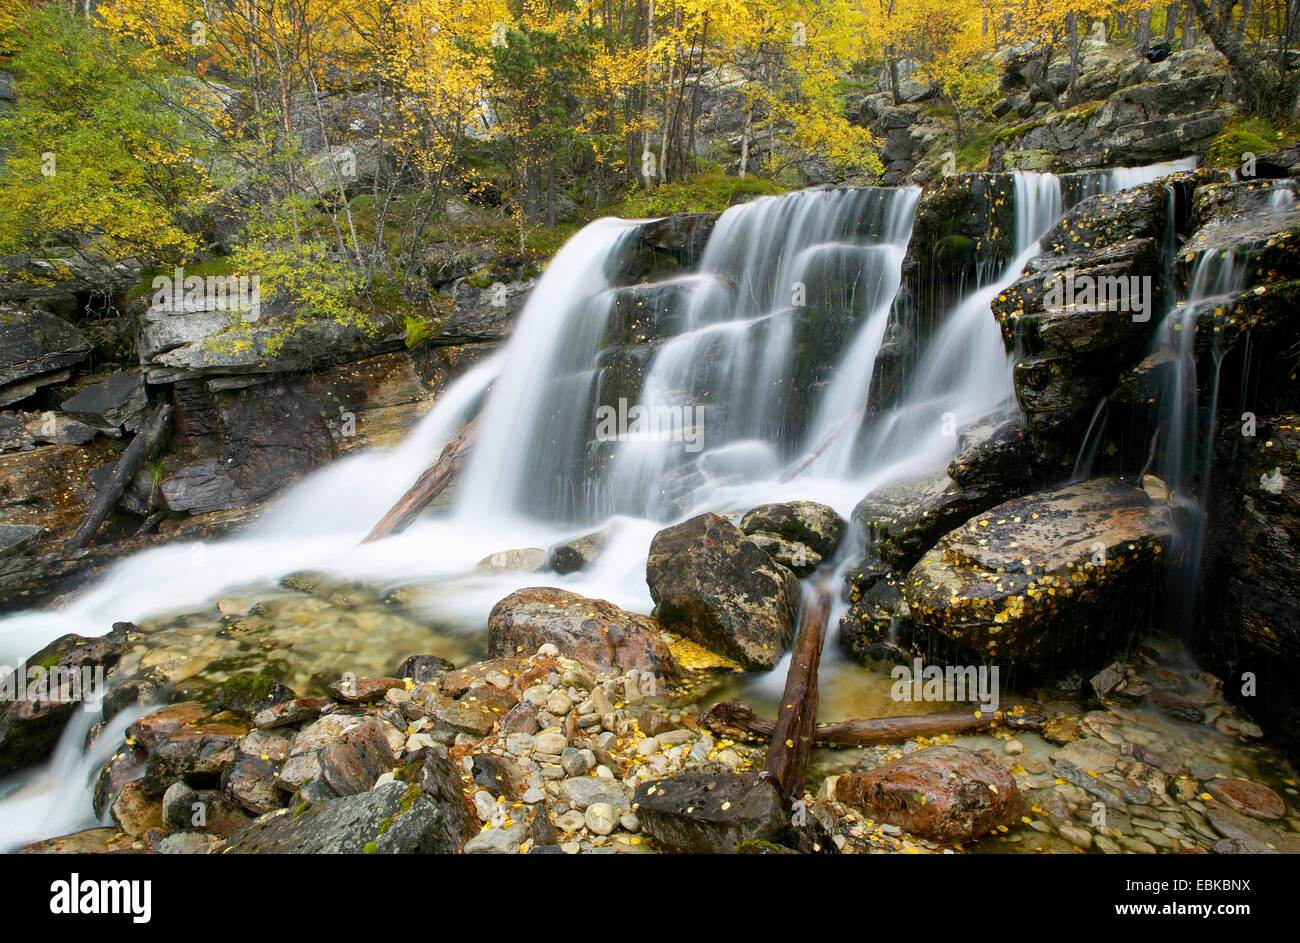 waterfall and river running through ancient boreal forest in autumn, Norway, Hedmark, Stor-Elvdal, Atndalen Stock Photo